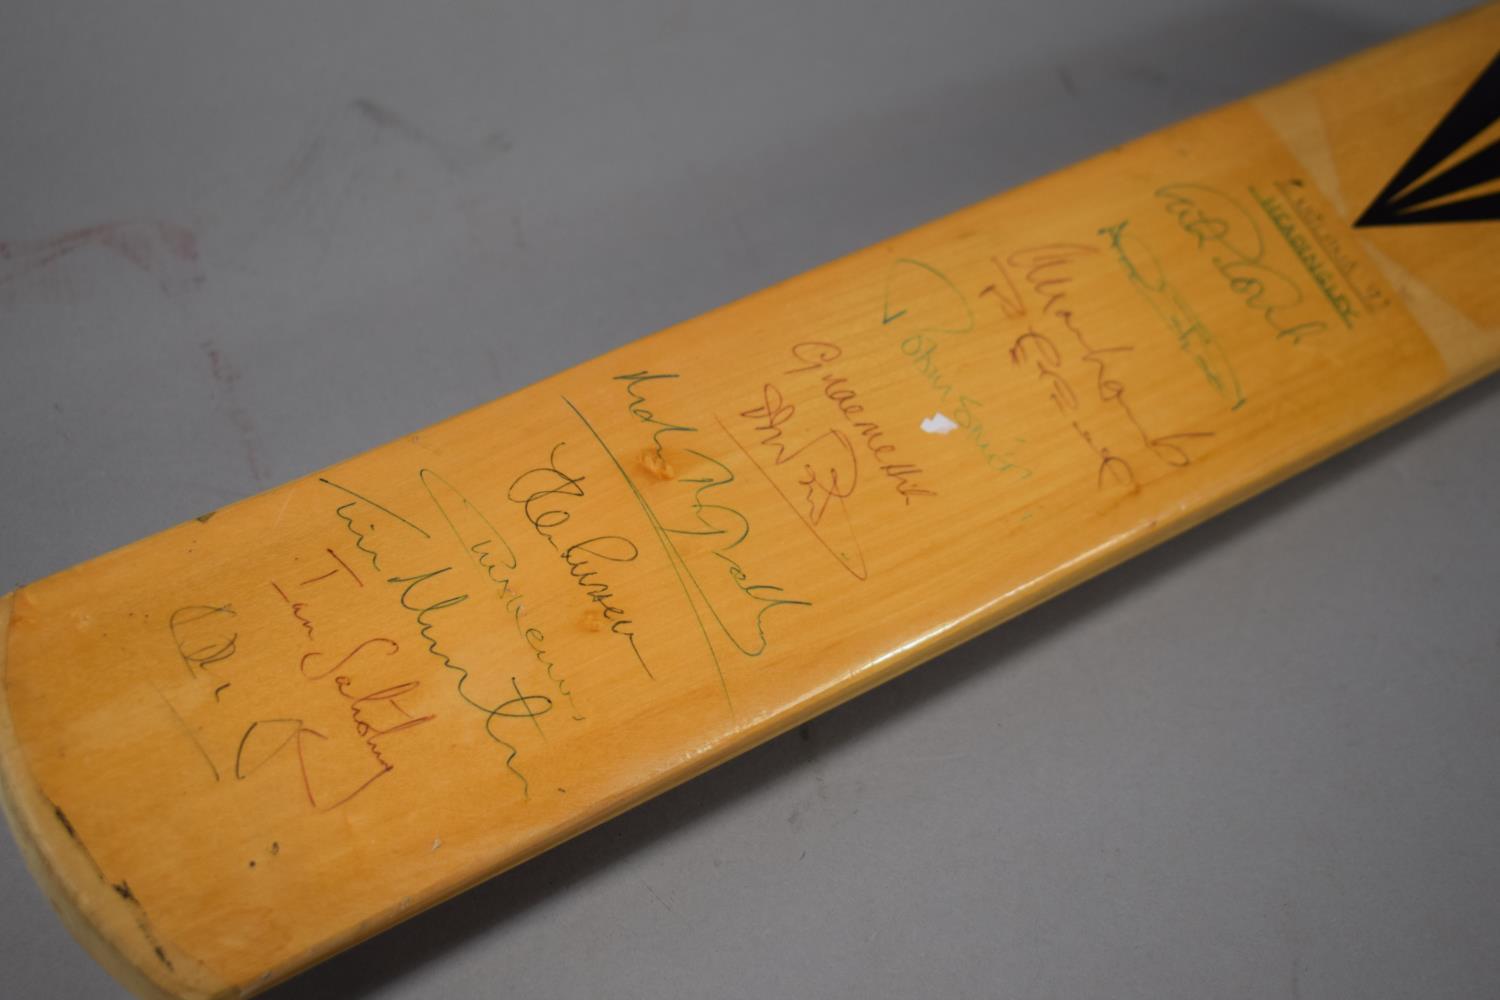 A Signed Full Size Duncan Fearnley Cricket Bat "England '92, Headingley" 13 Autographs - Image 2 of 2